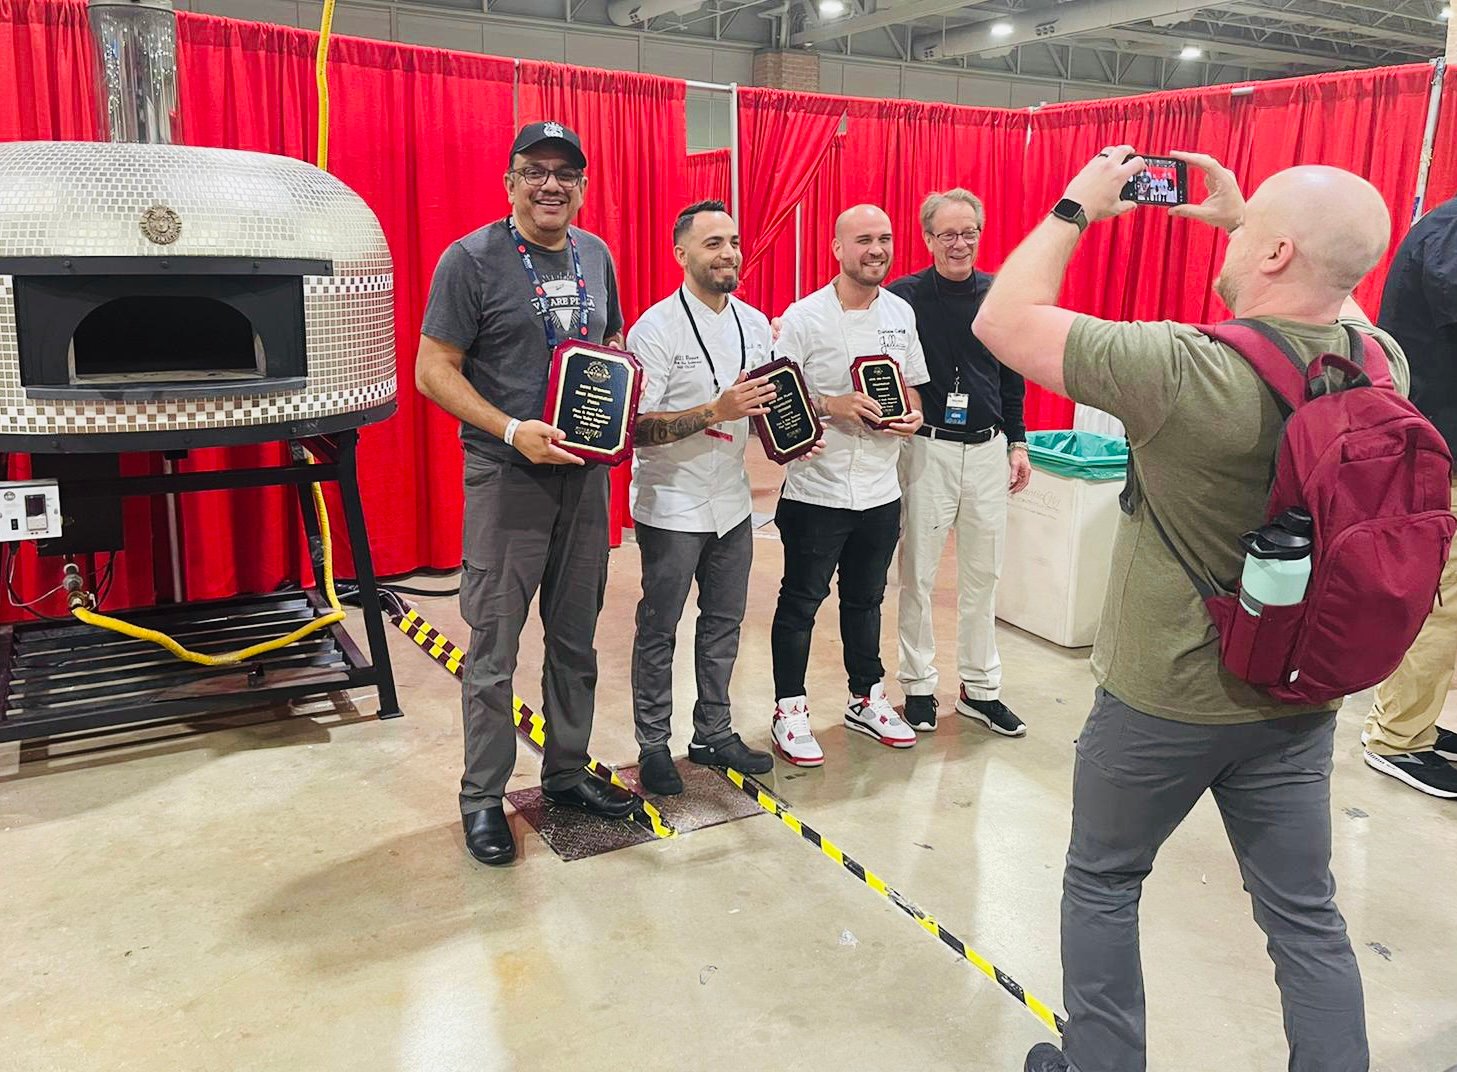 Onion Tree co-owner and chef Jay Jadeja, far left, took a photo with second and third place winners Daniele Gagliotta and Daniele Caridi, and show director Bill Oakley at the Pizza and Pasta Northeast 2022 Competition.